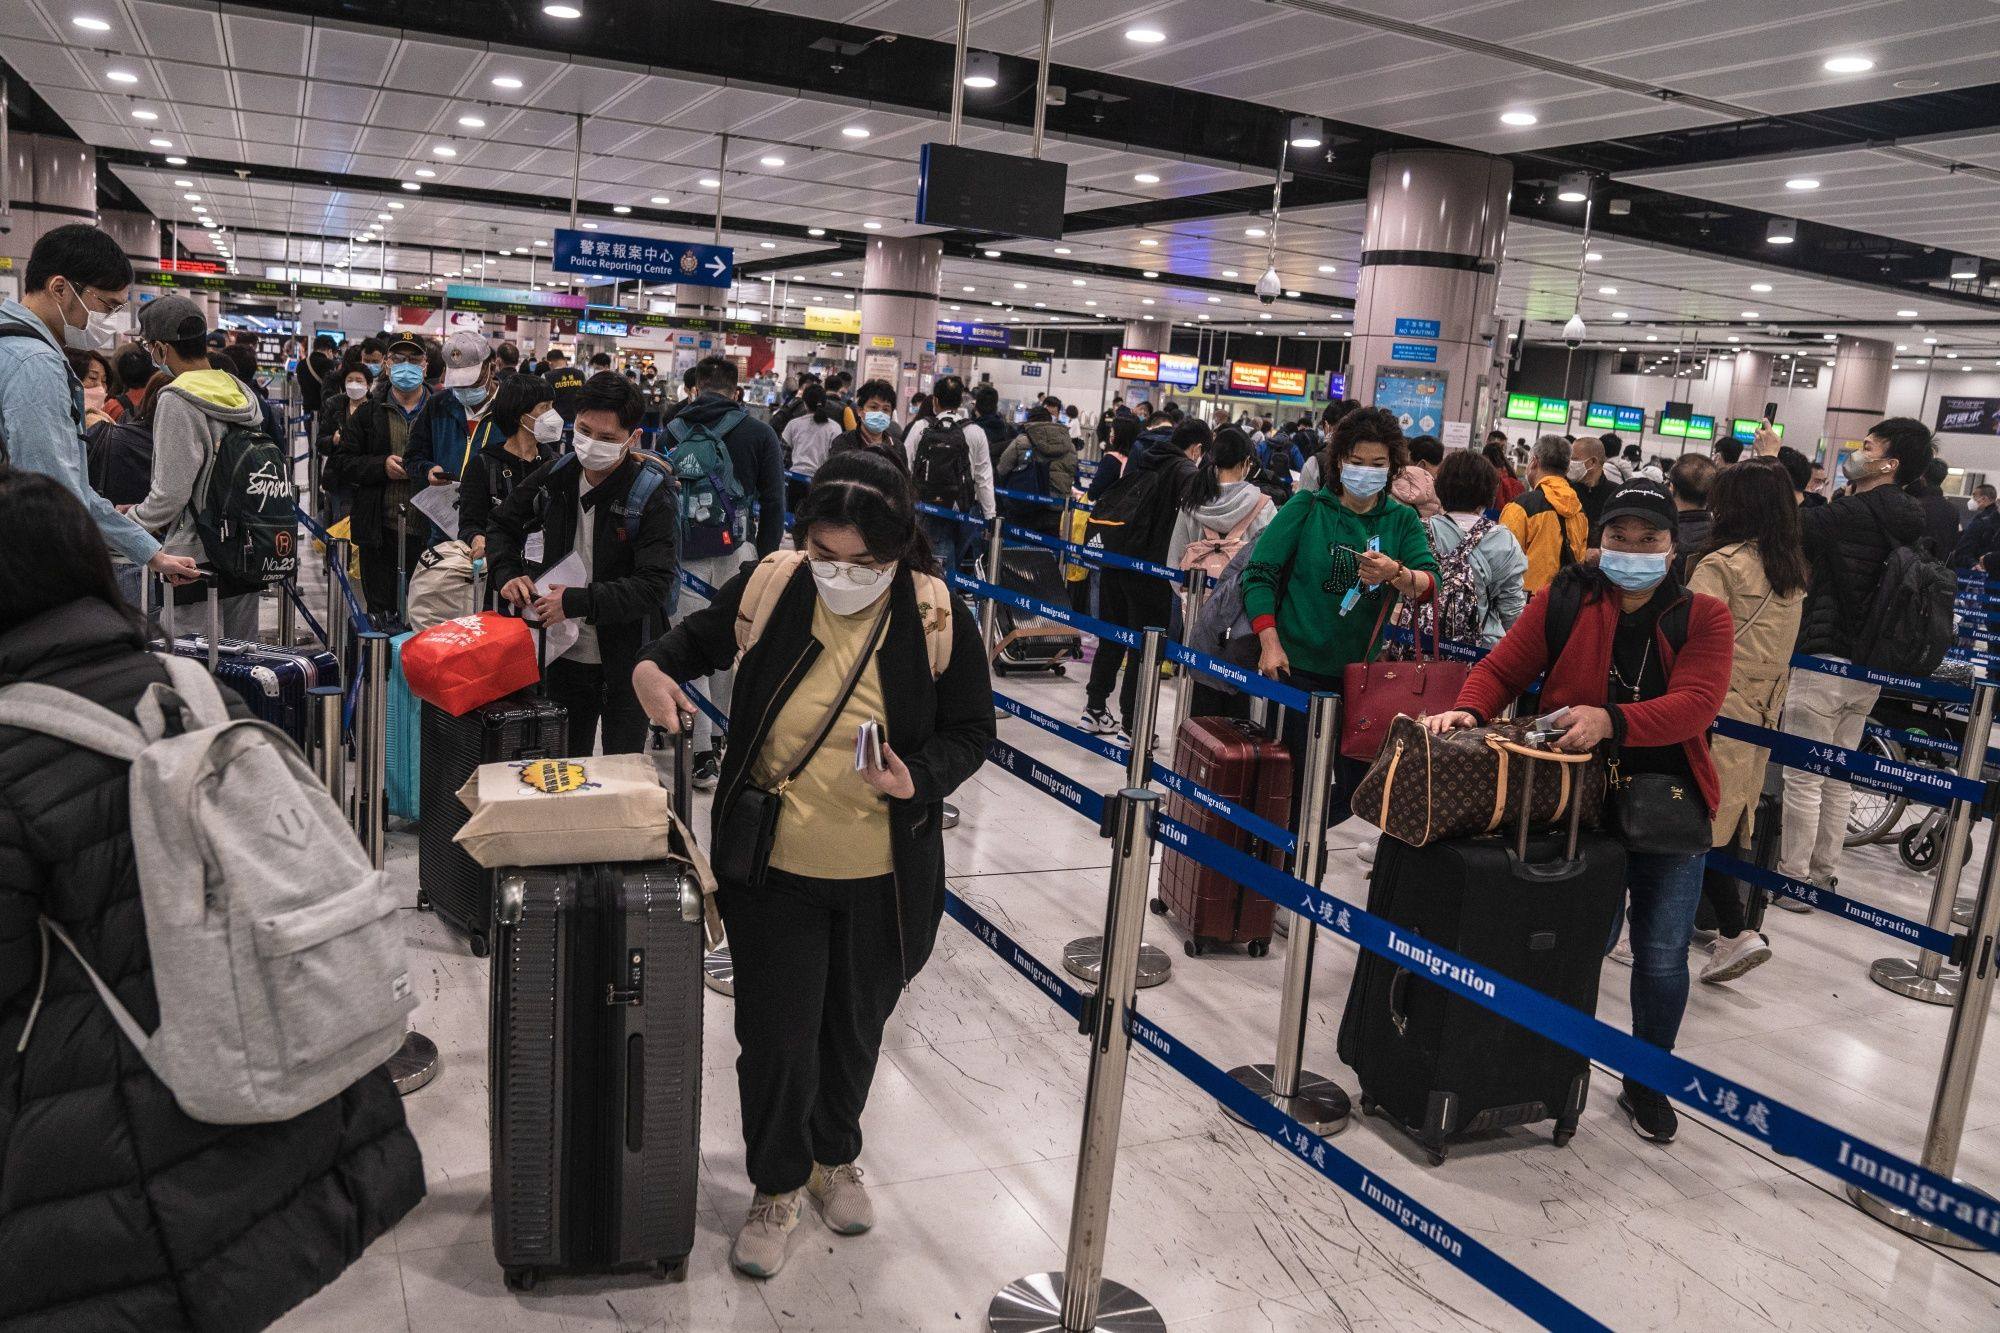 Travellers queue in the border control area at Lok Ma Chau station on January 8, the first day the border with the mainland was reopened for quarantine-free travel. Photo: Bloomberg